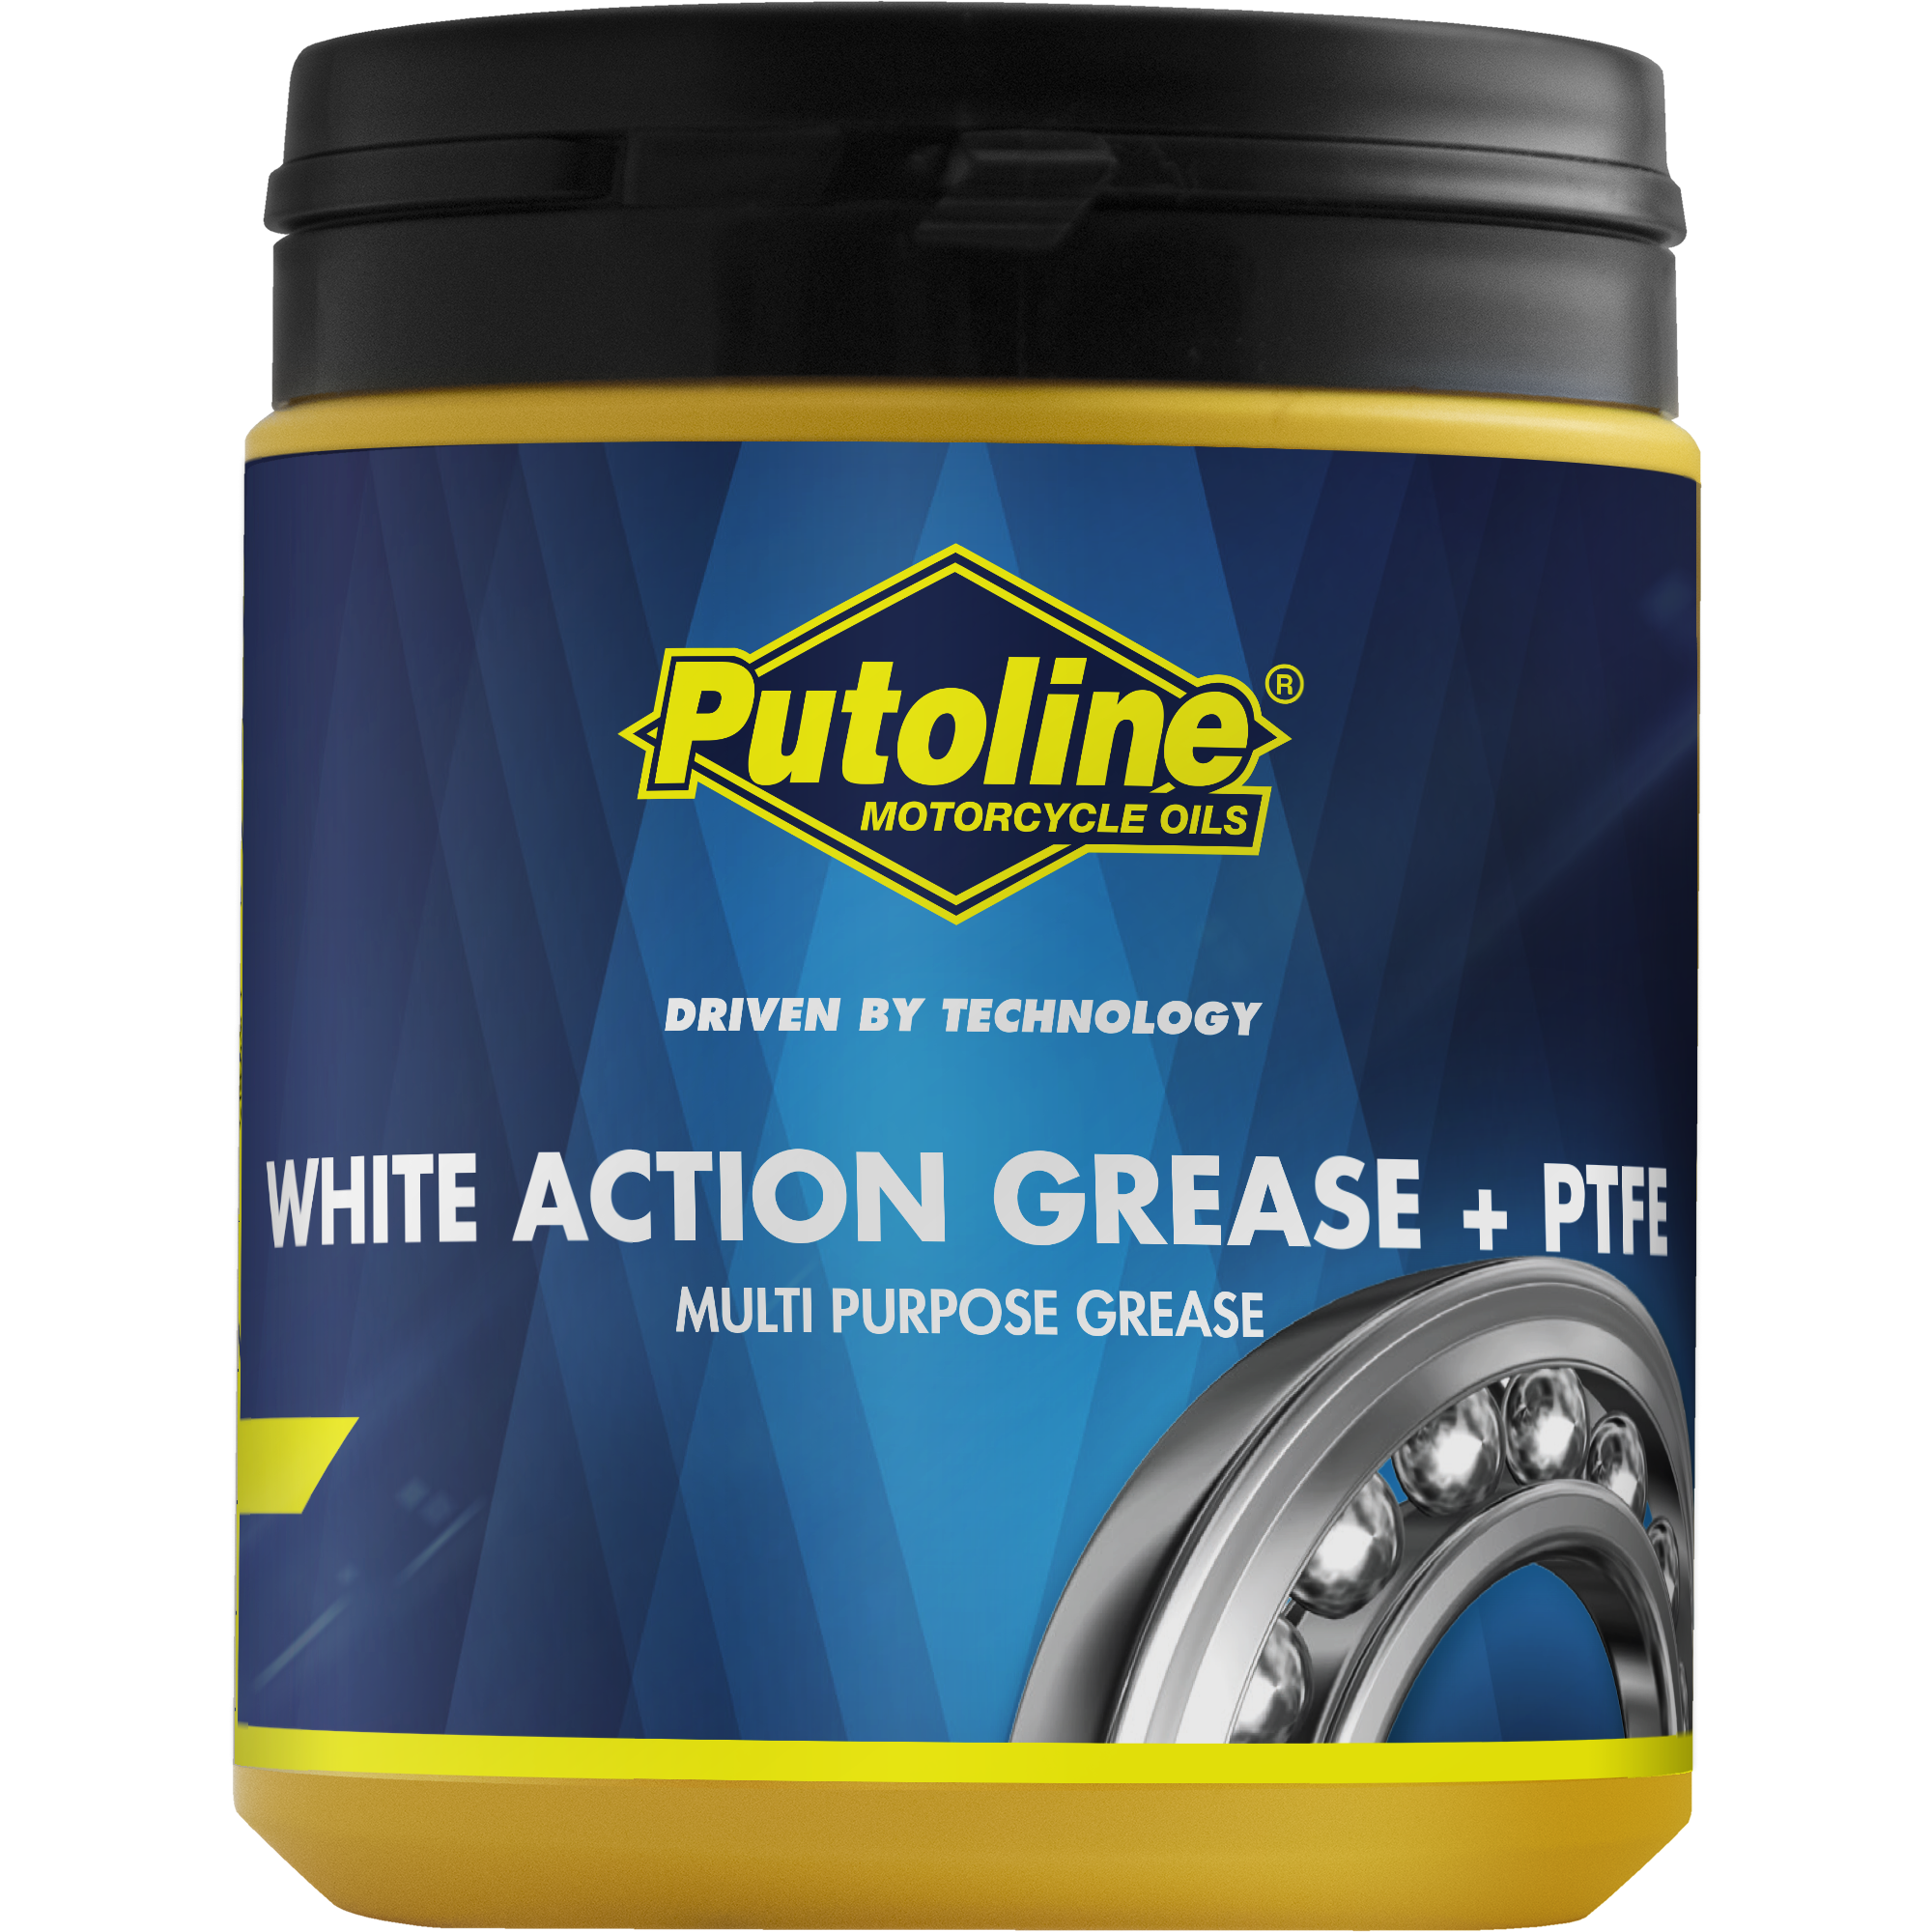 Putoline White Action Grease + PTFE, 6 x 600 gr detail 2